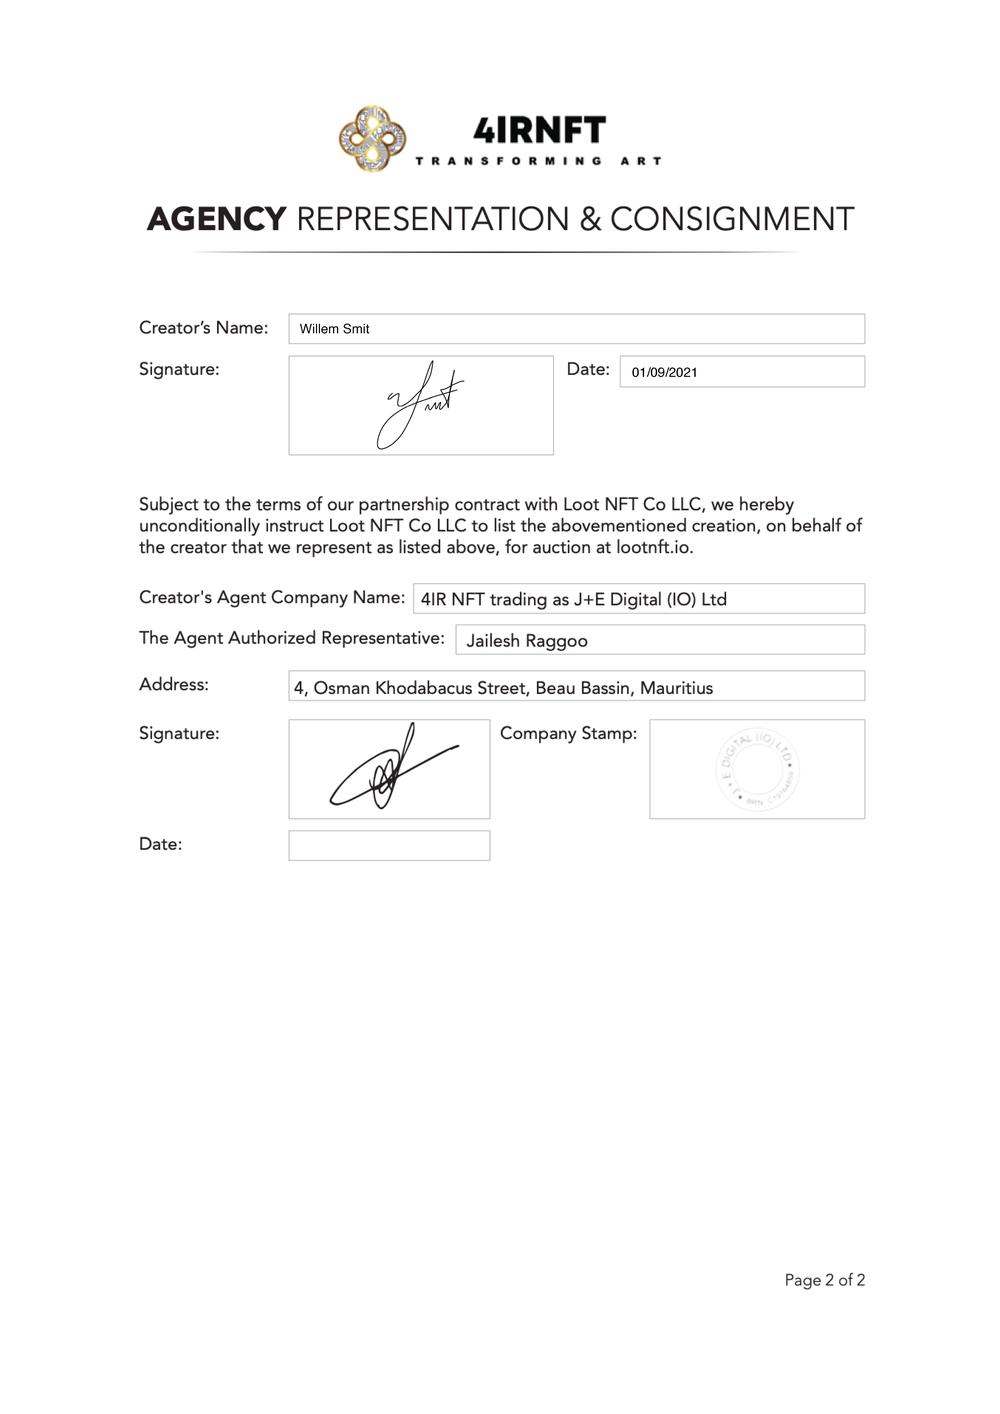 Certificate of Authenticity and Consignment Archipelago